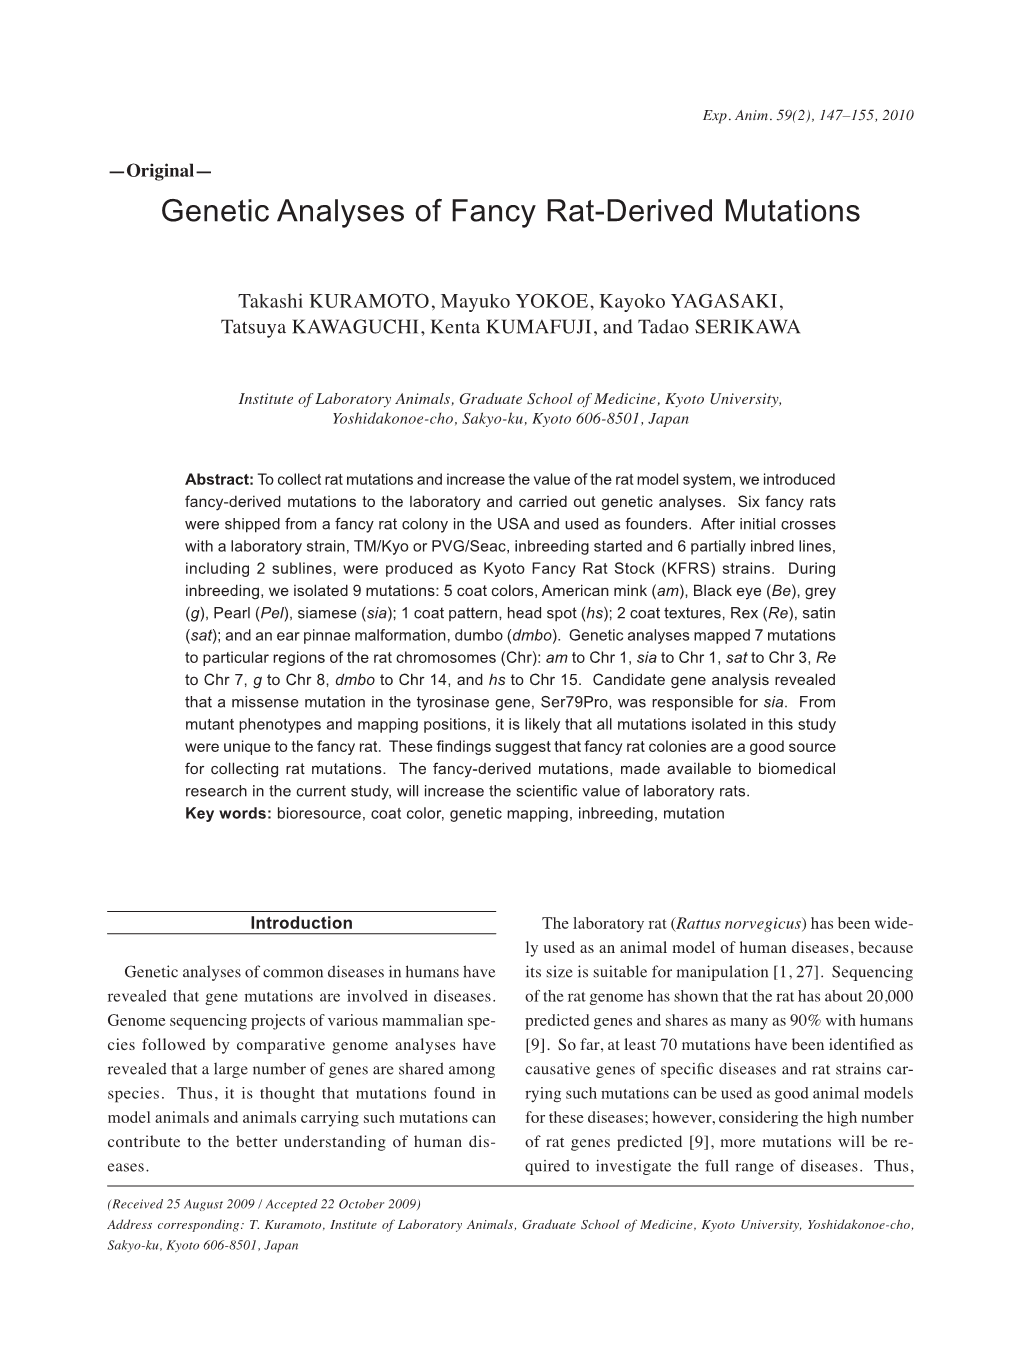 Genetic Analyses of Fancy Rat-Derived Mutations